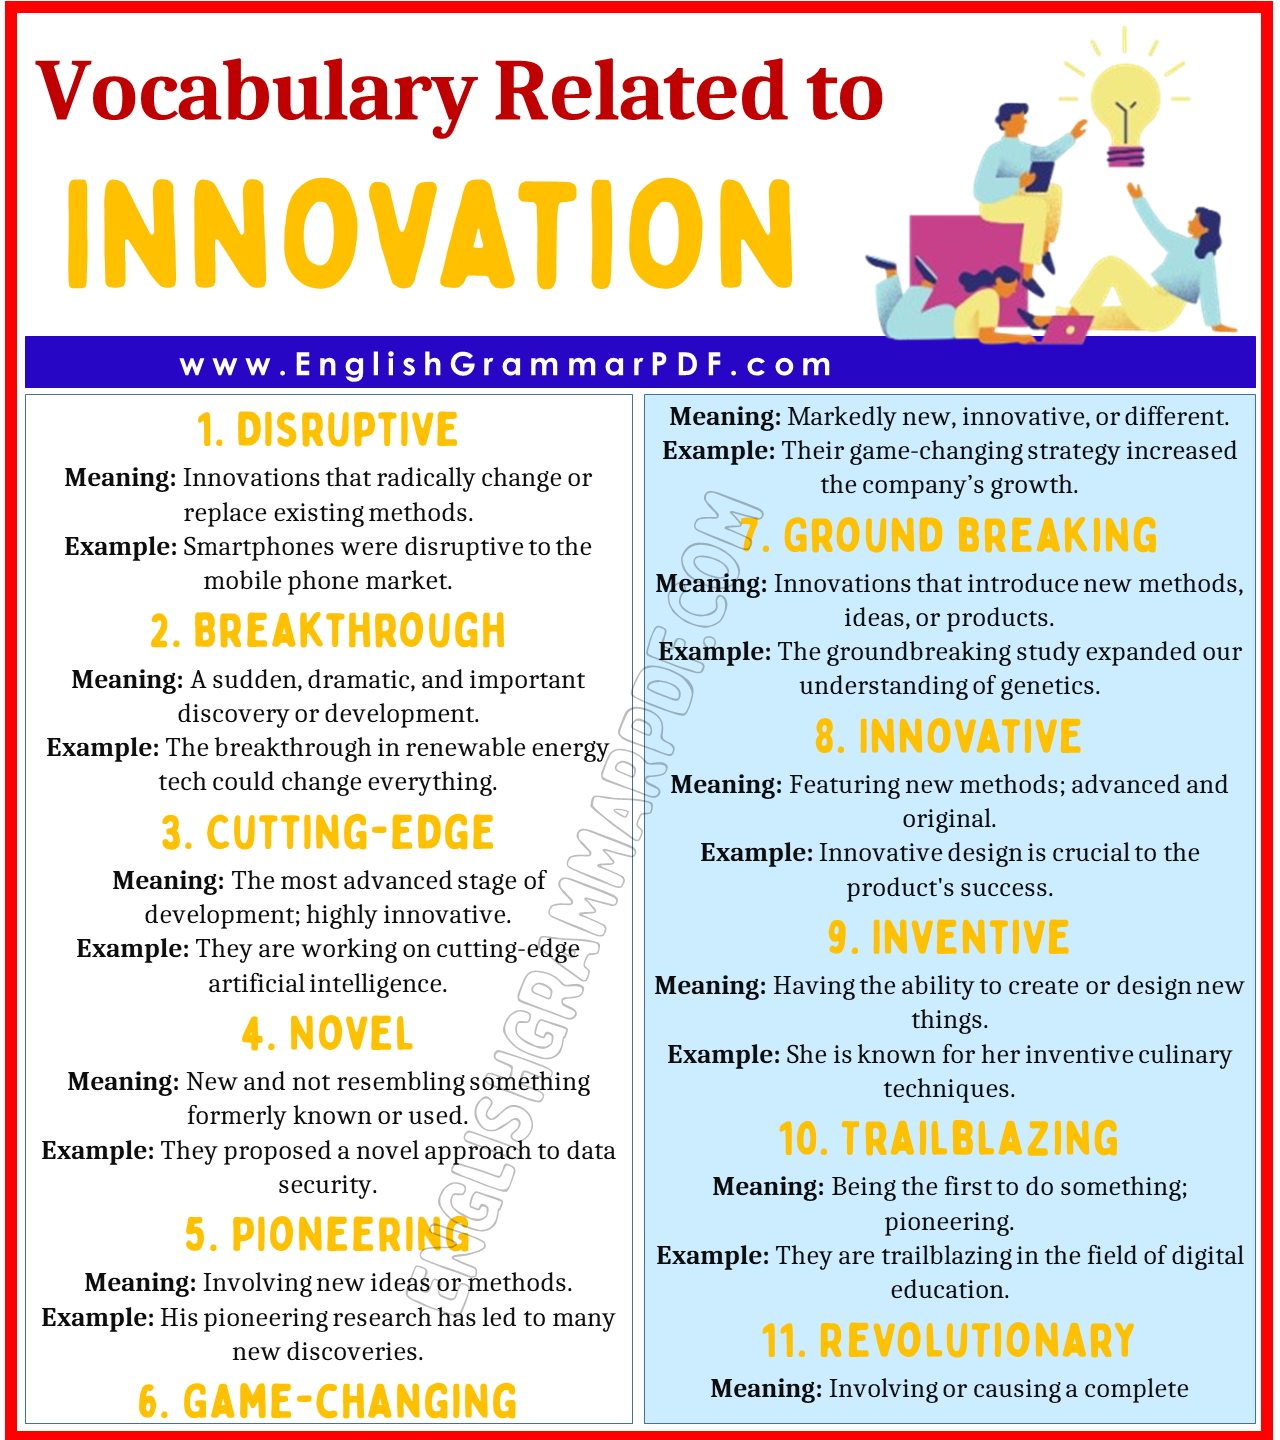 Vocabulary Words Related to Innovation